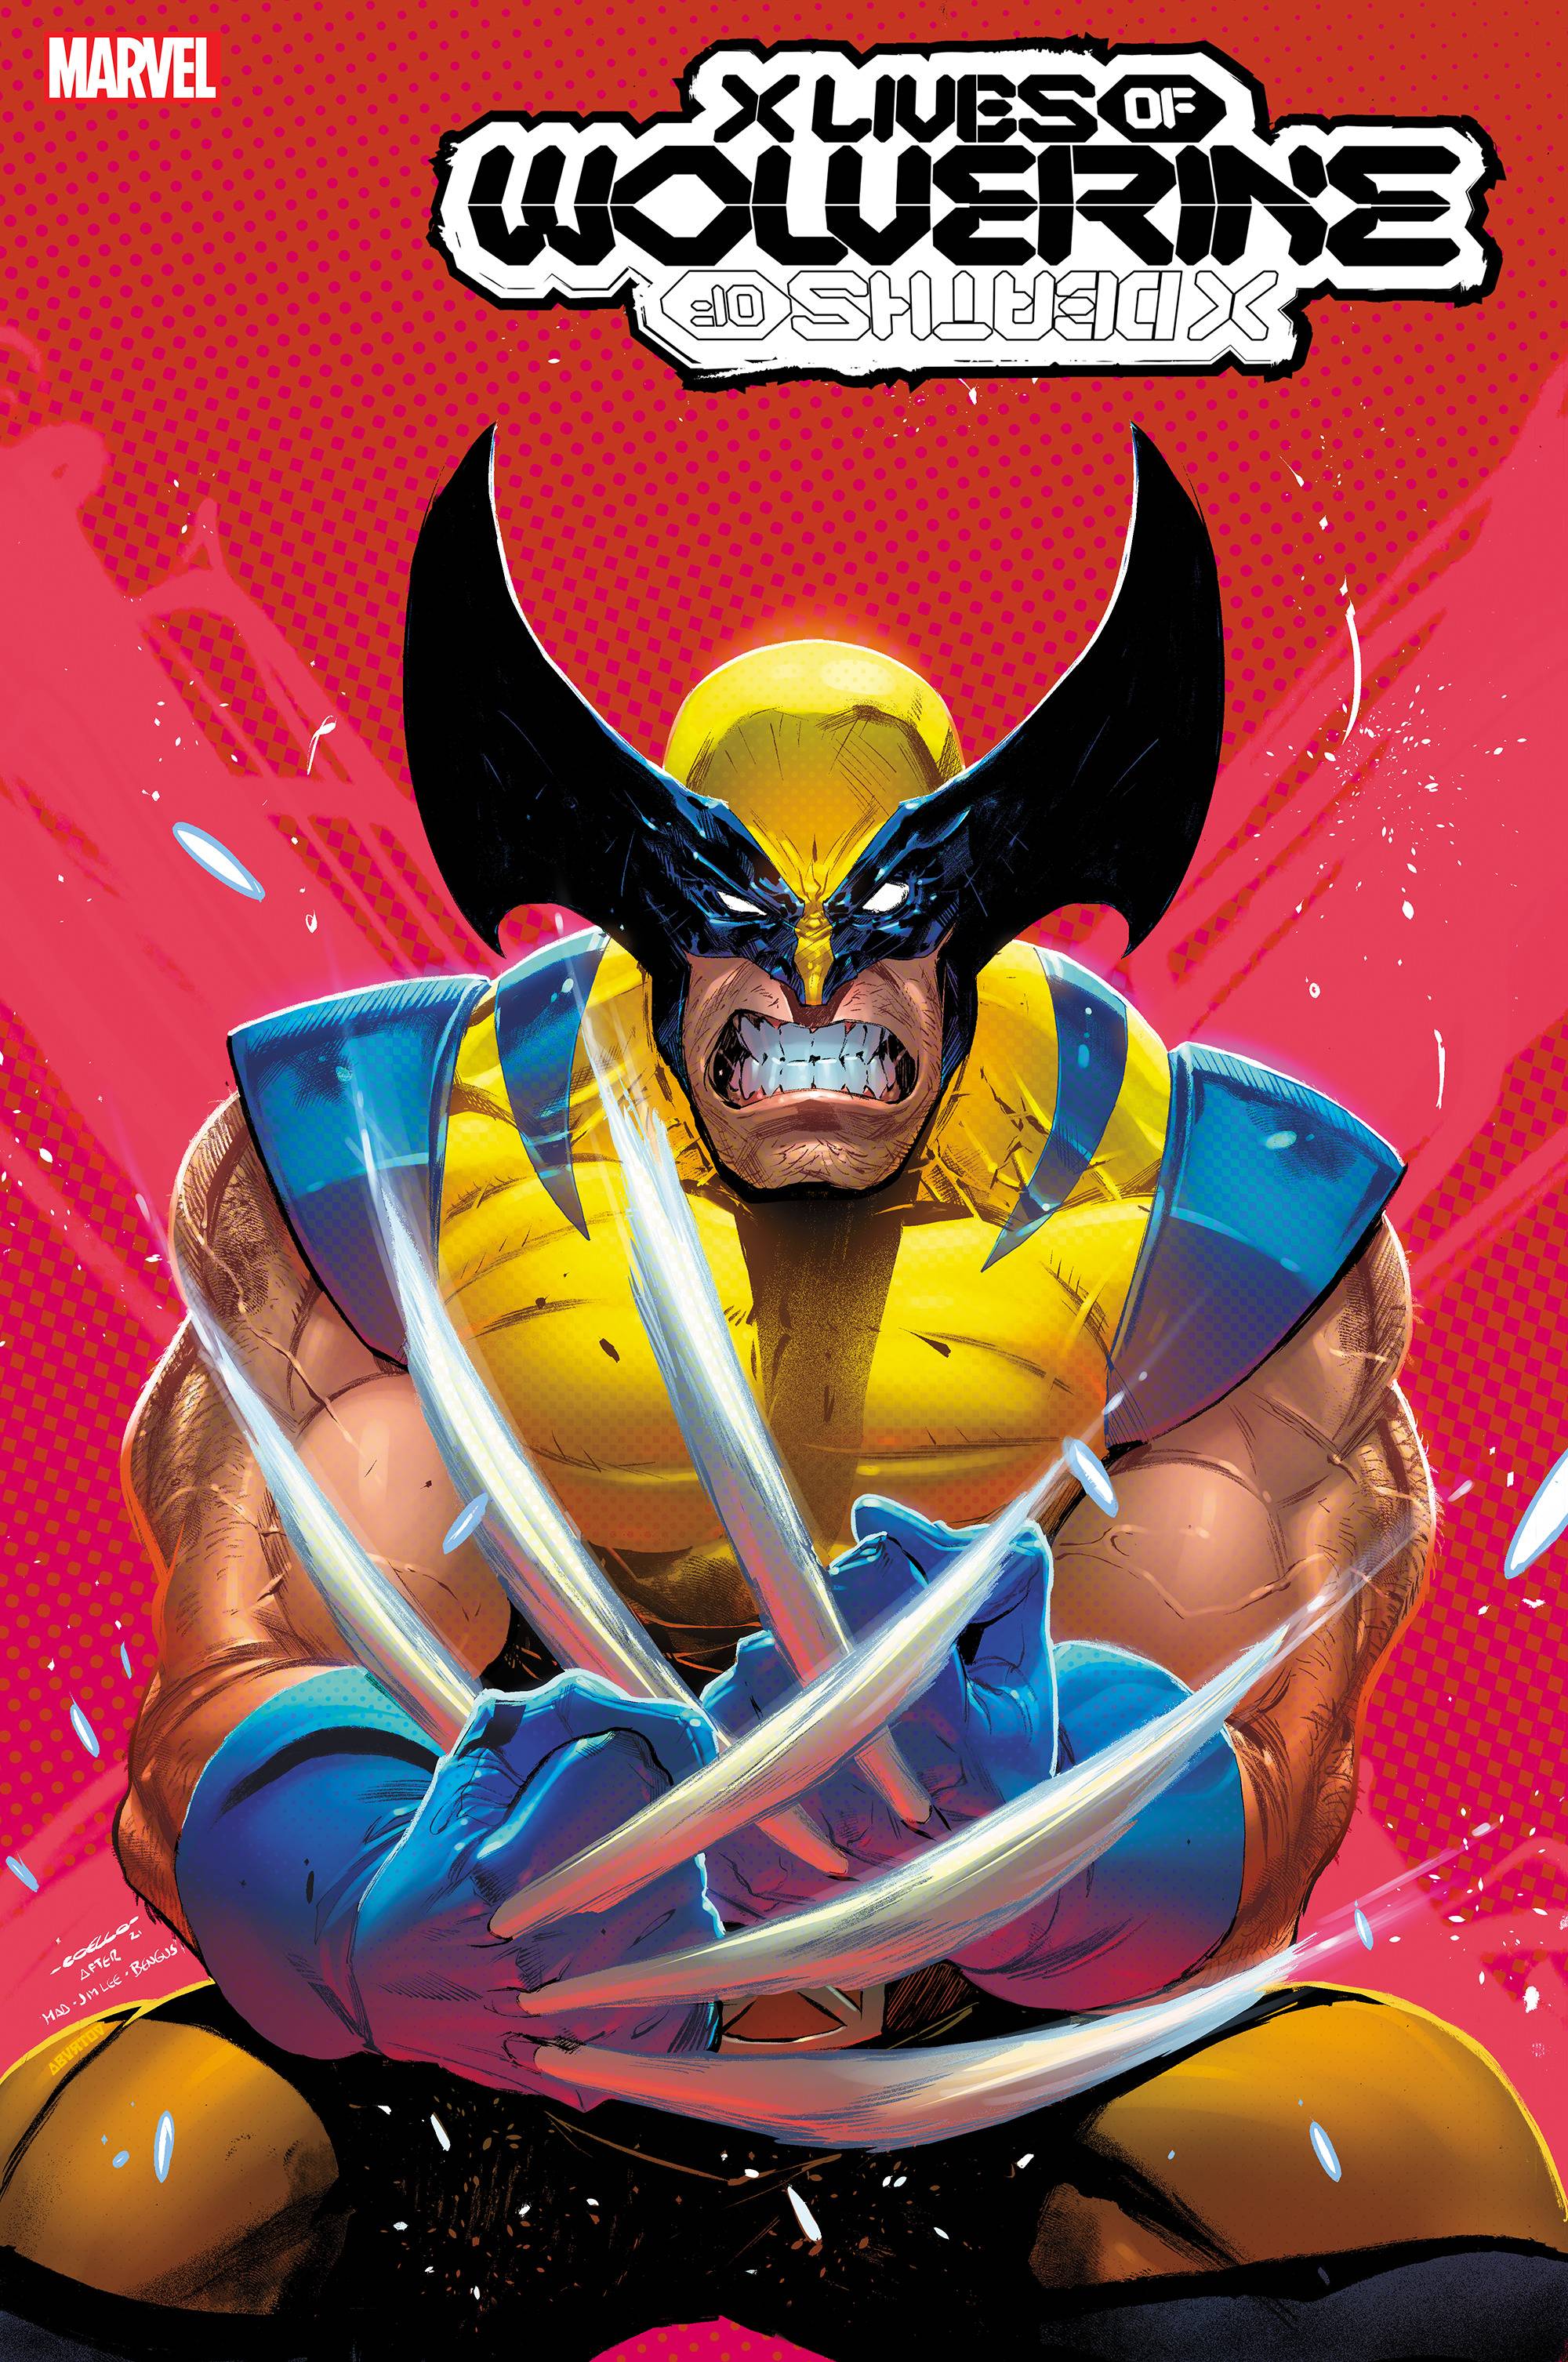 X LIVES OF WOLVERINE #2 COELLO STORMBREAKERS VAR